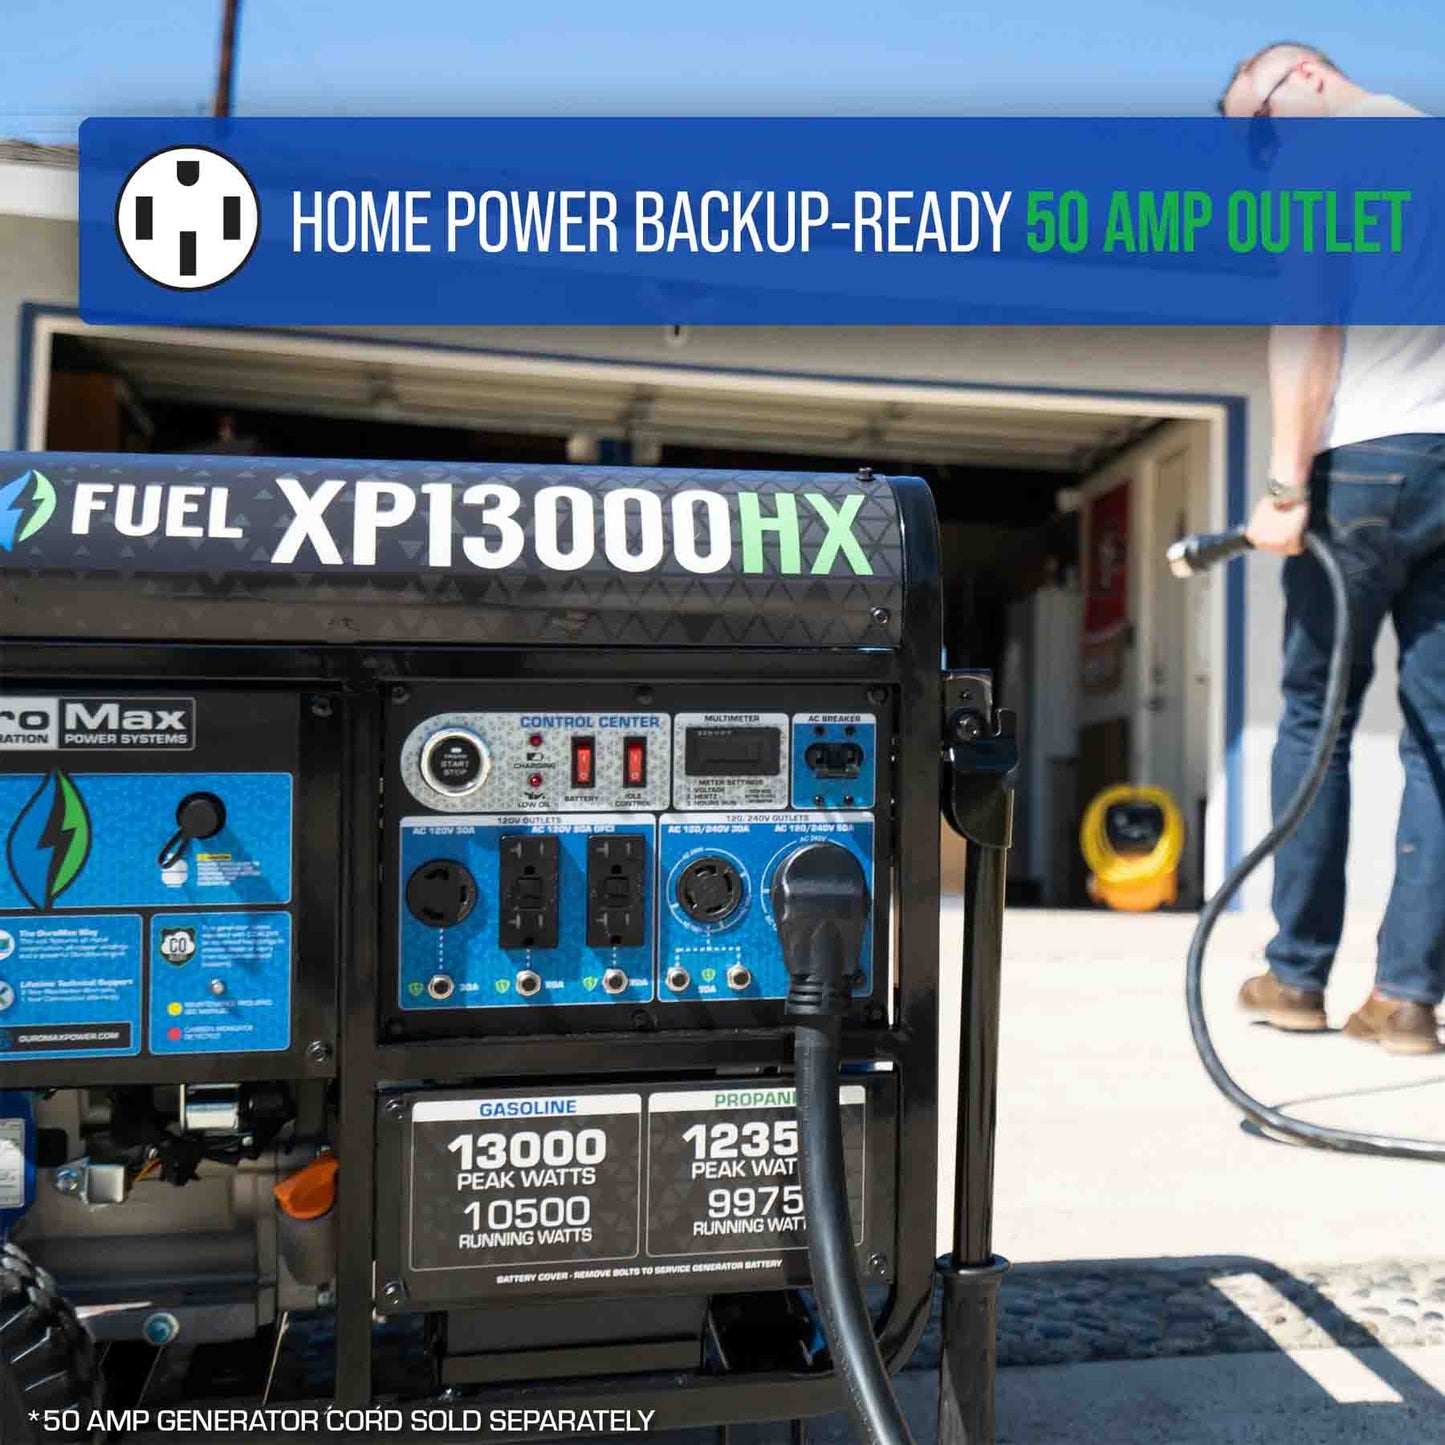 The DuroMax XP13000HX Dual Fuel Portable Generator Has A Home Power Backup-Ready 50-Amp Outlet